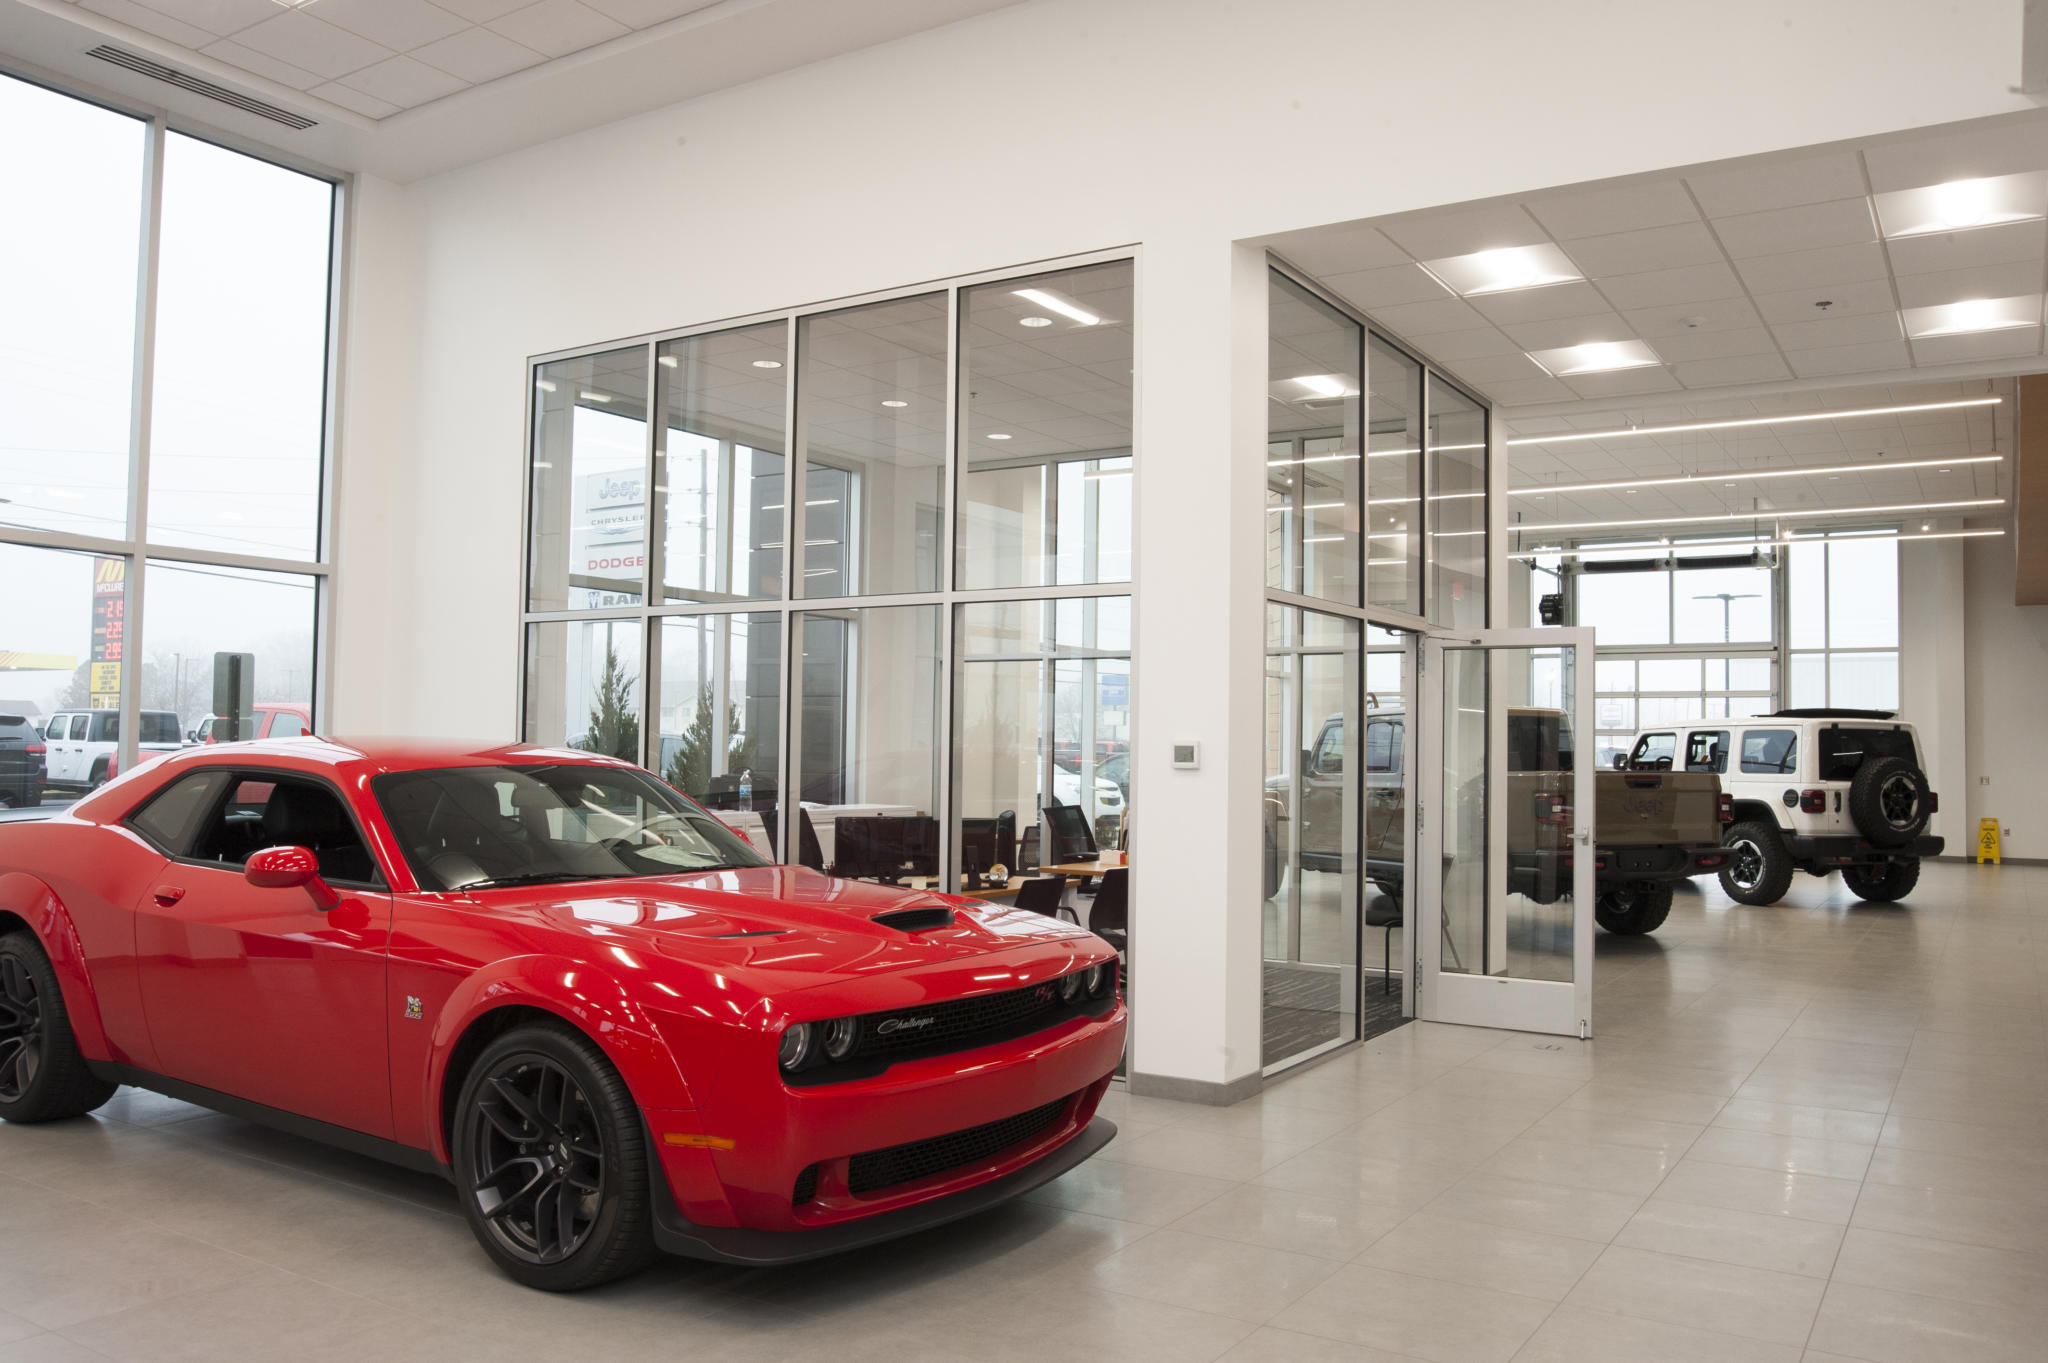 image of office near showroom at car dealership